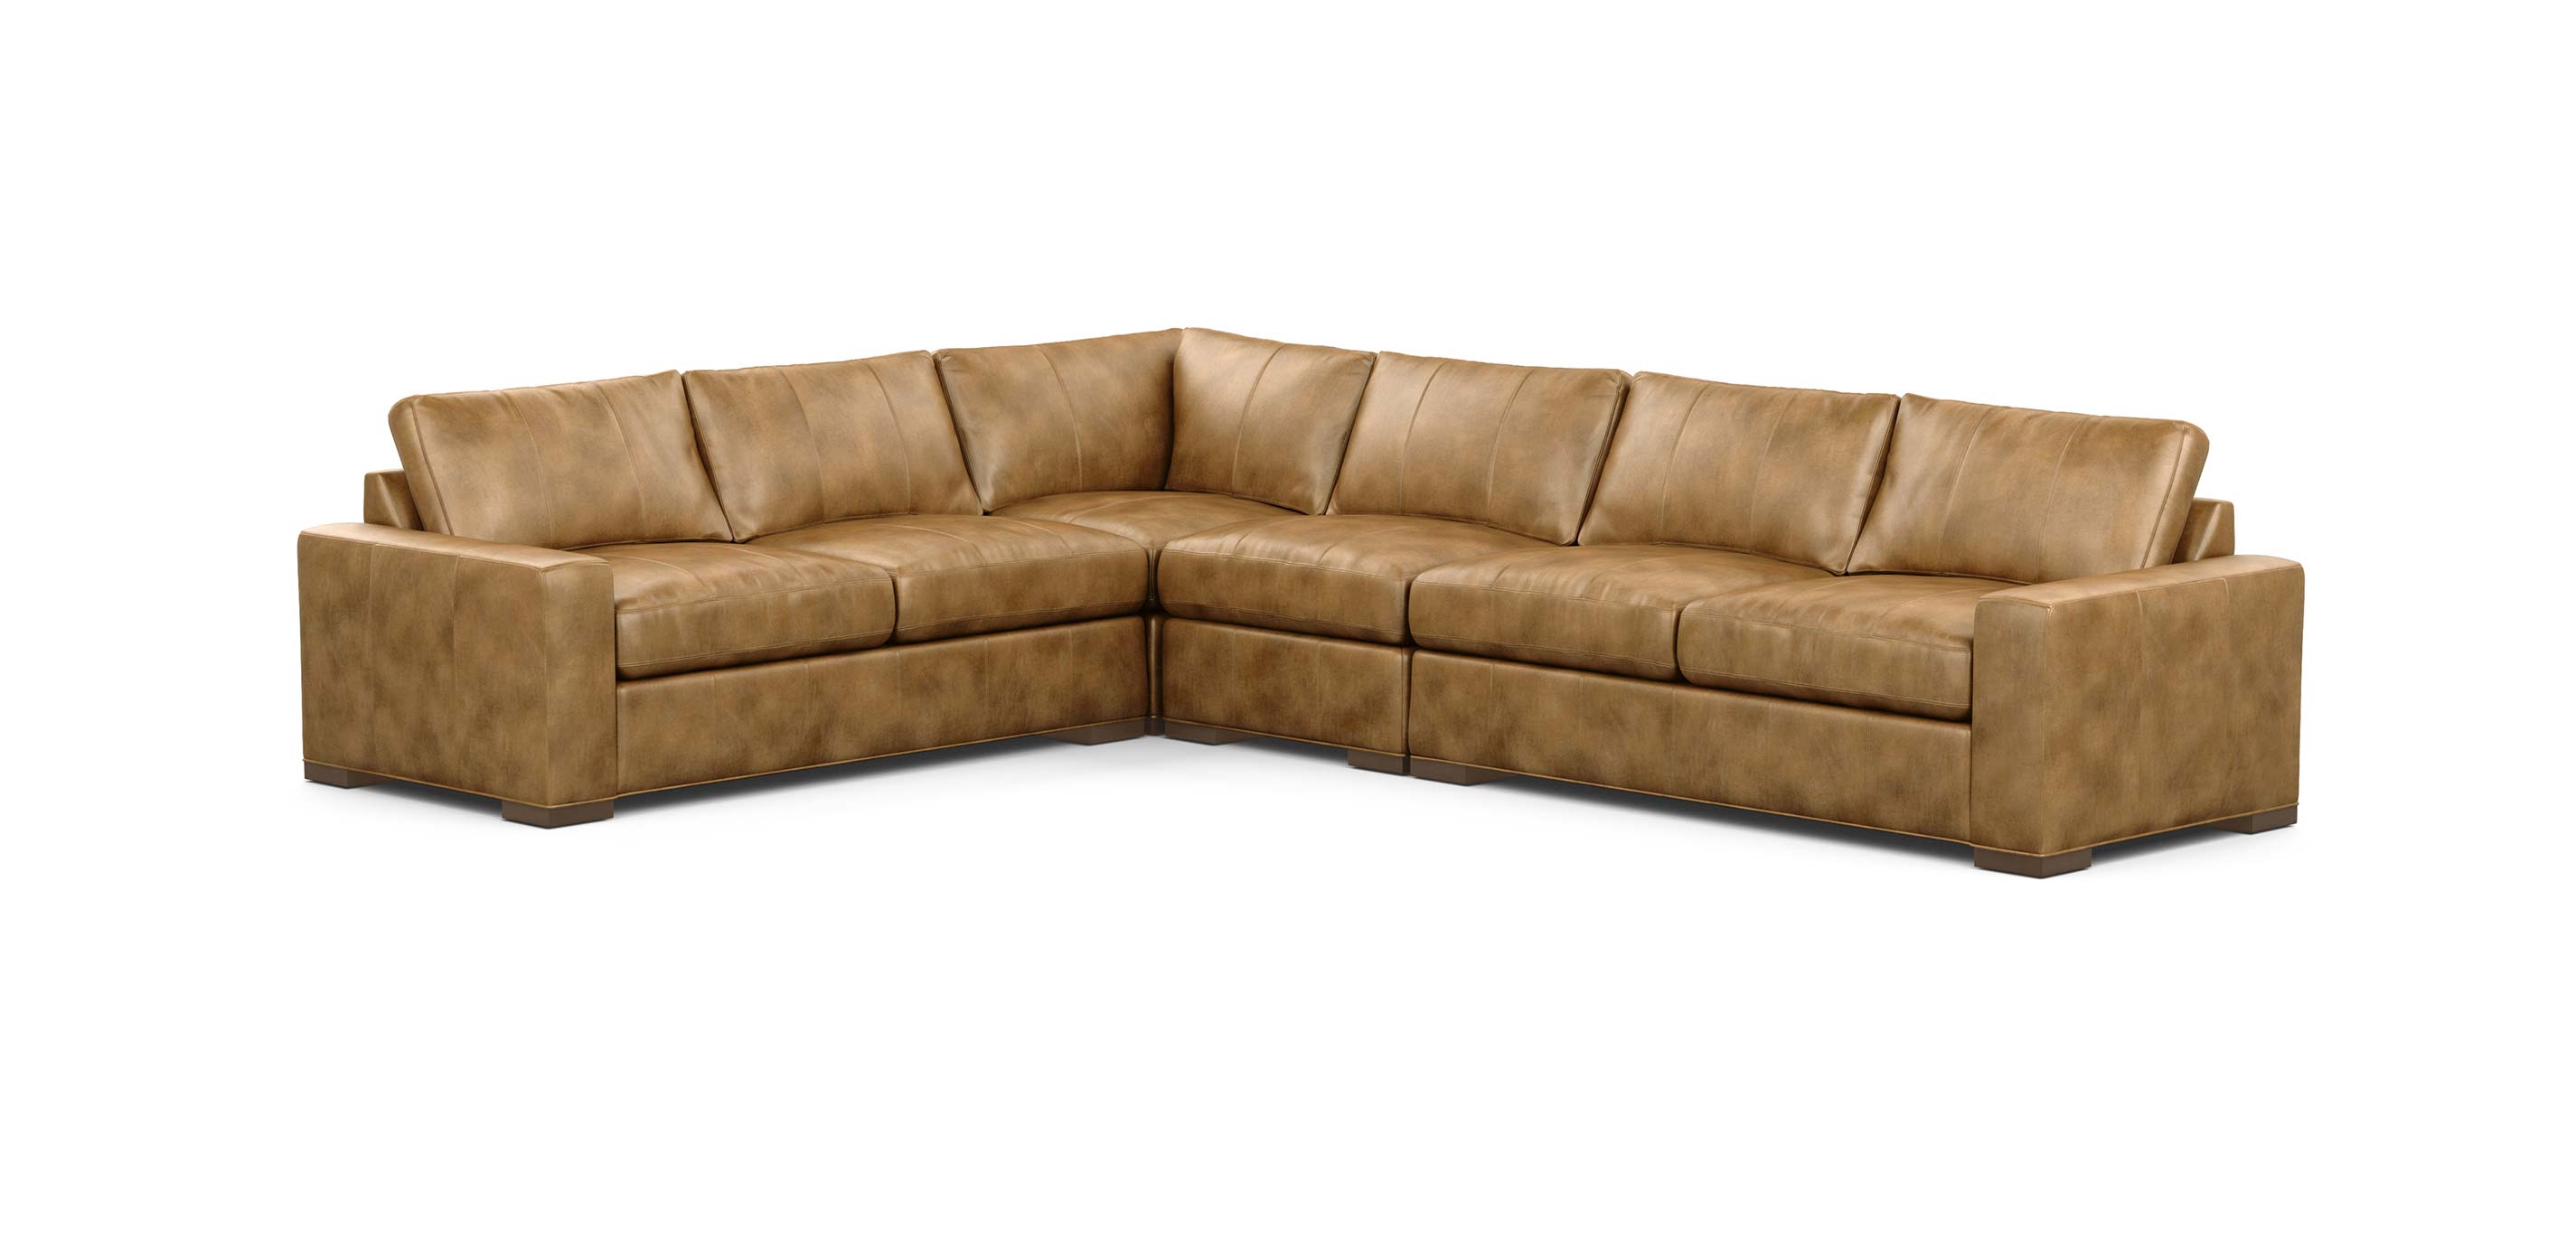 Conway Four Piece Leather Sectional, Ethan Allen Leather Sectionals